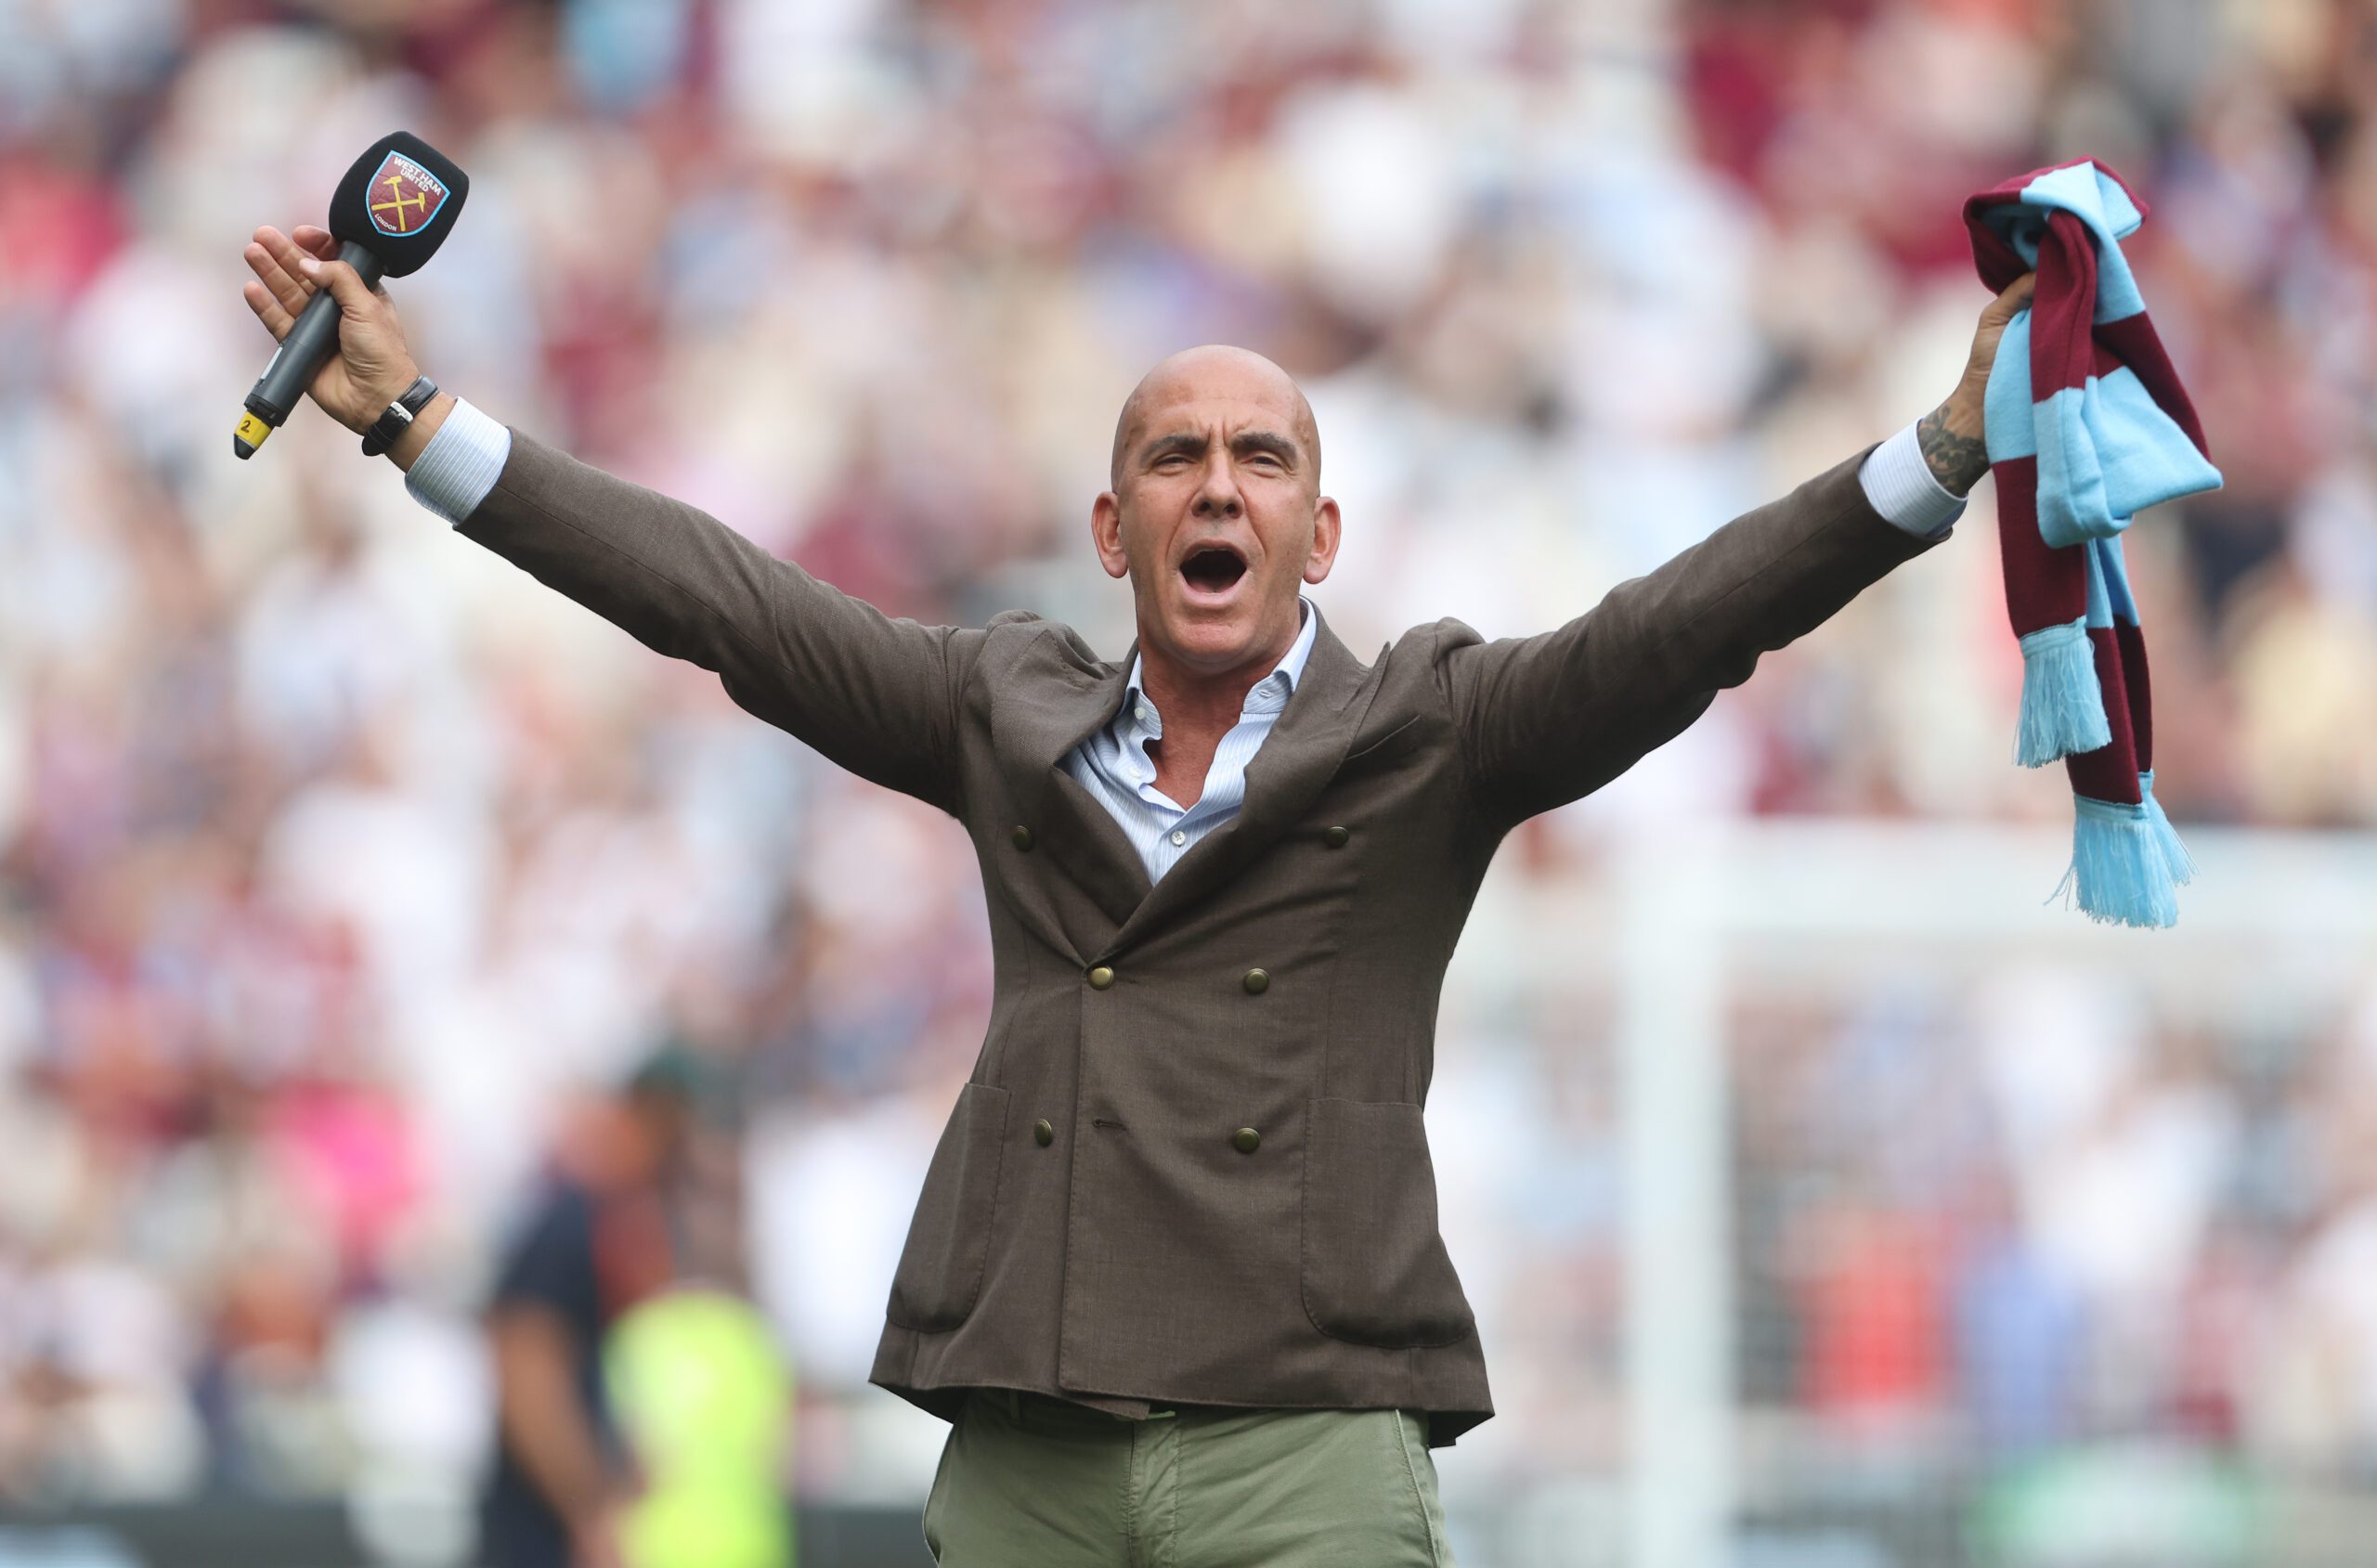 Paolo Di Canio: I was told to “run away to Italy” after pushing referee Paul Alcock